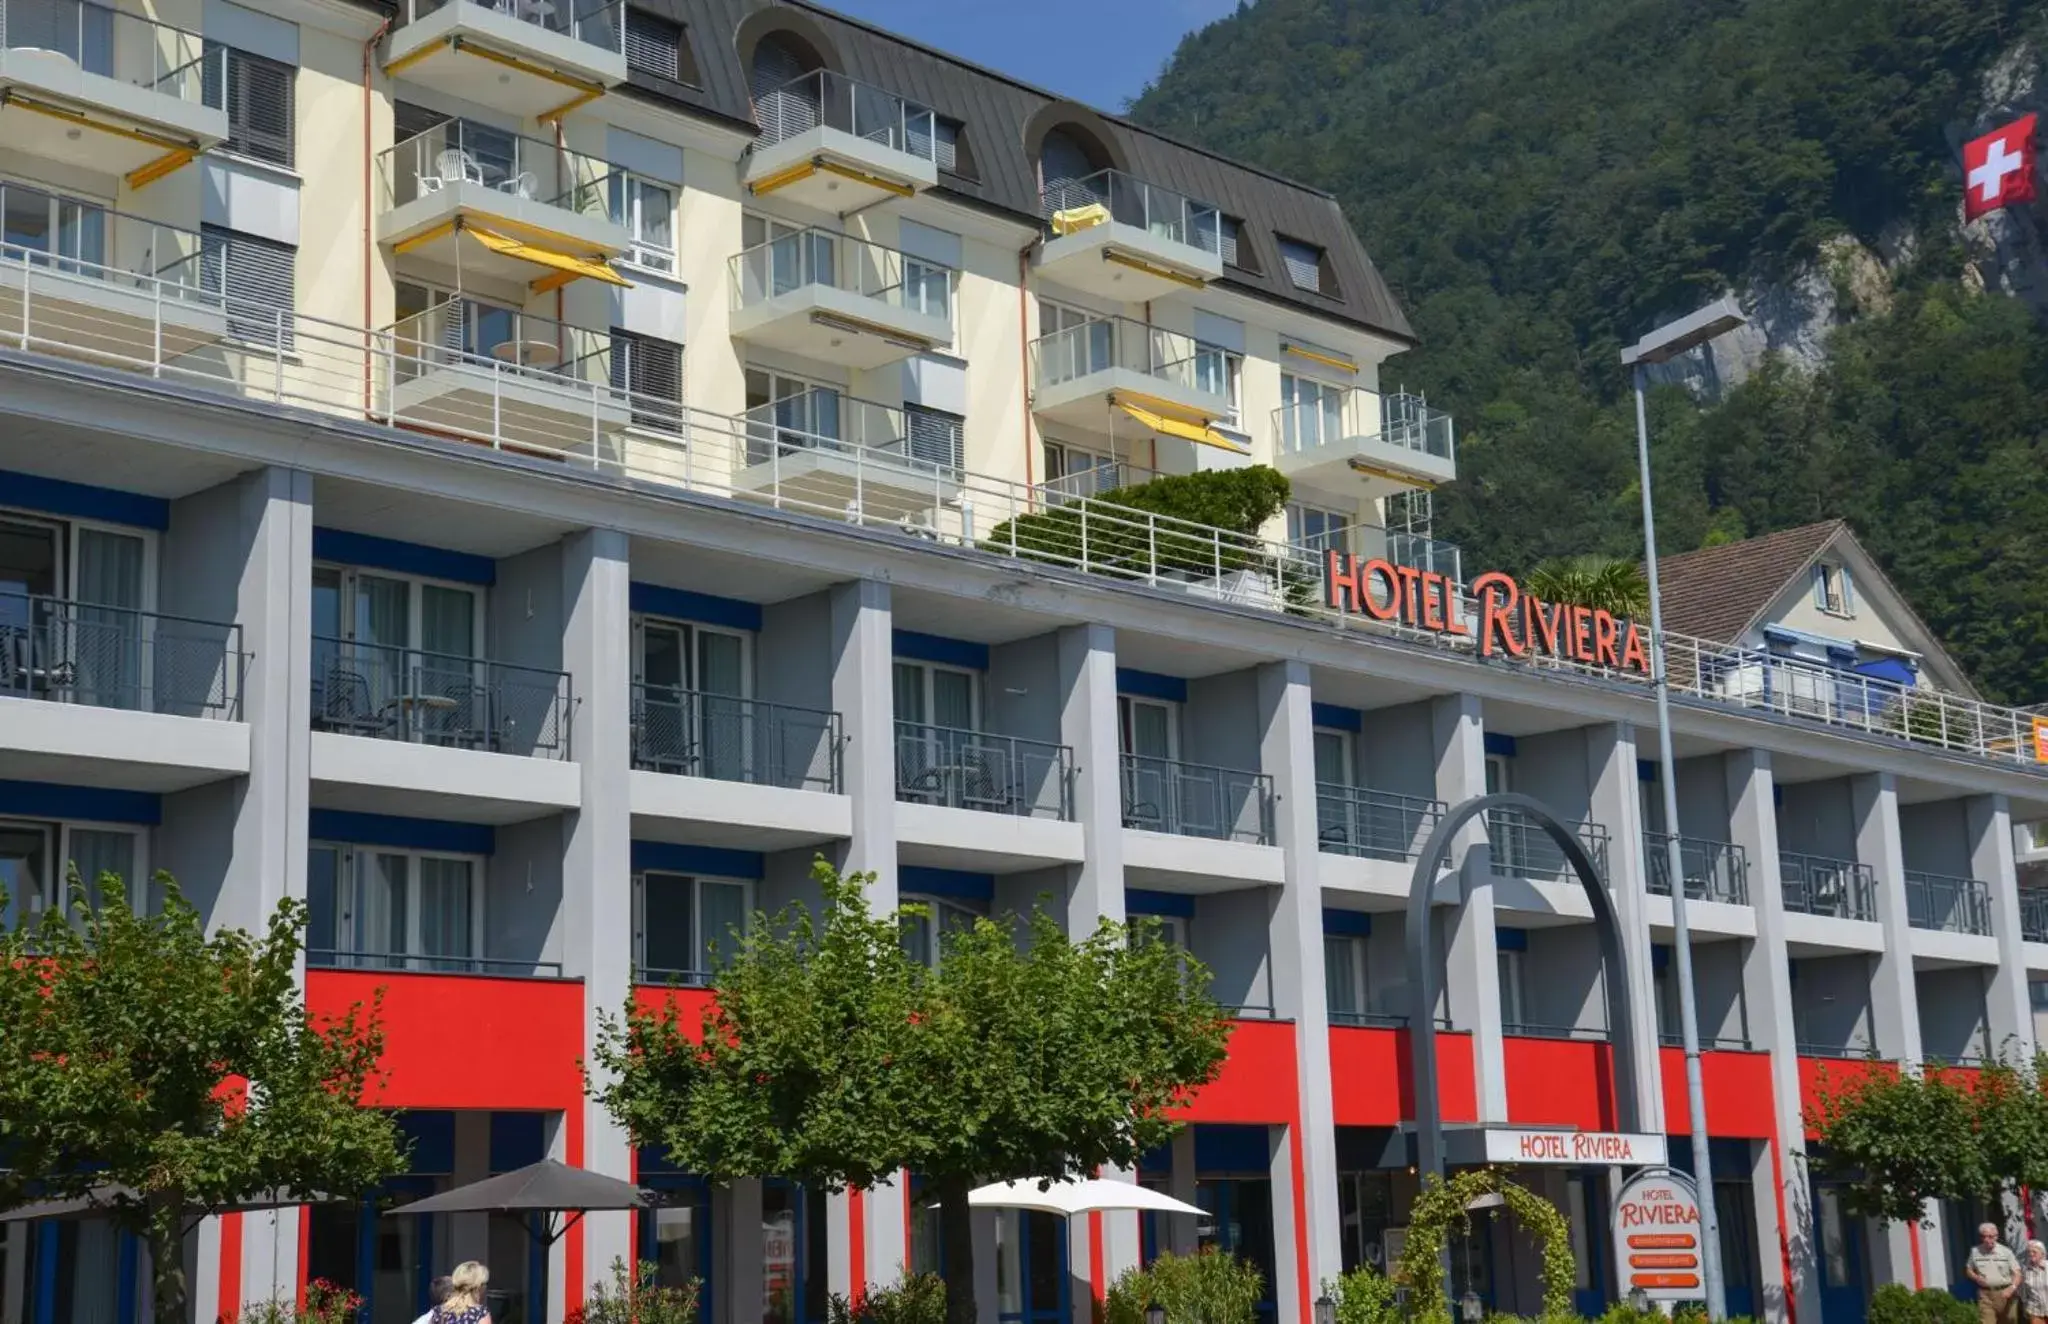 Facade/entrance, Property Building in Seehotel Riviera at Lake Lucerne